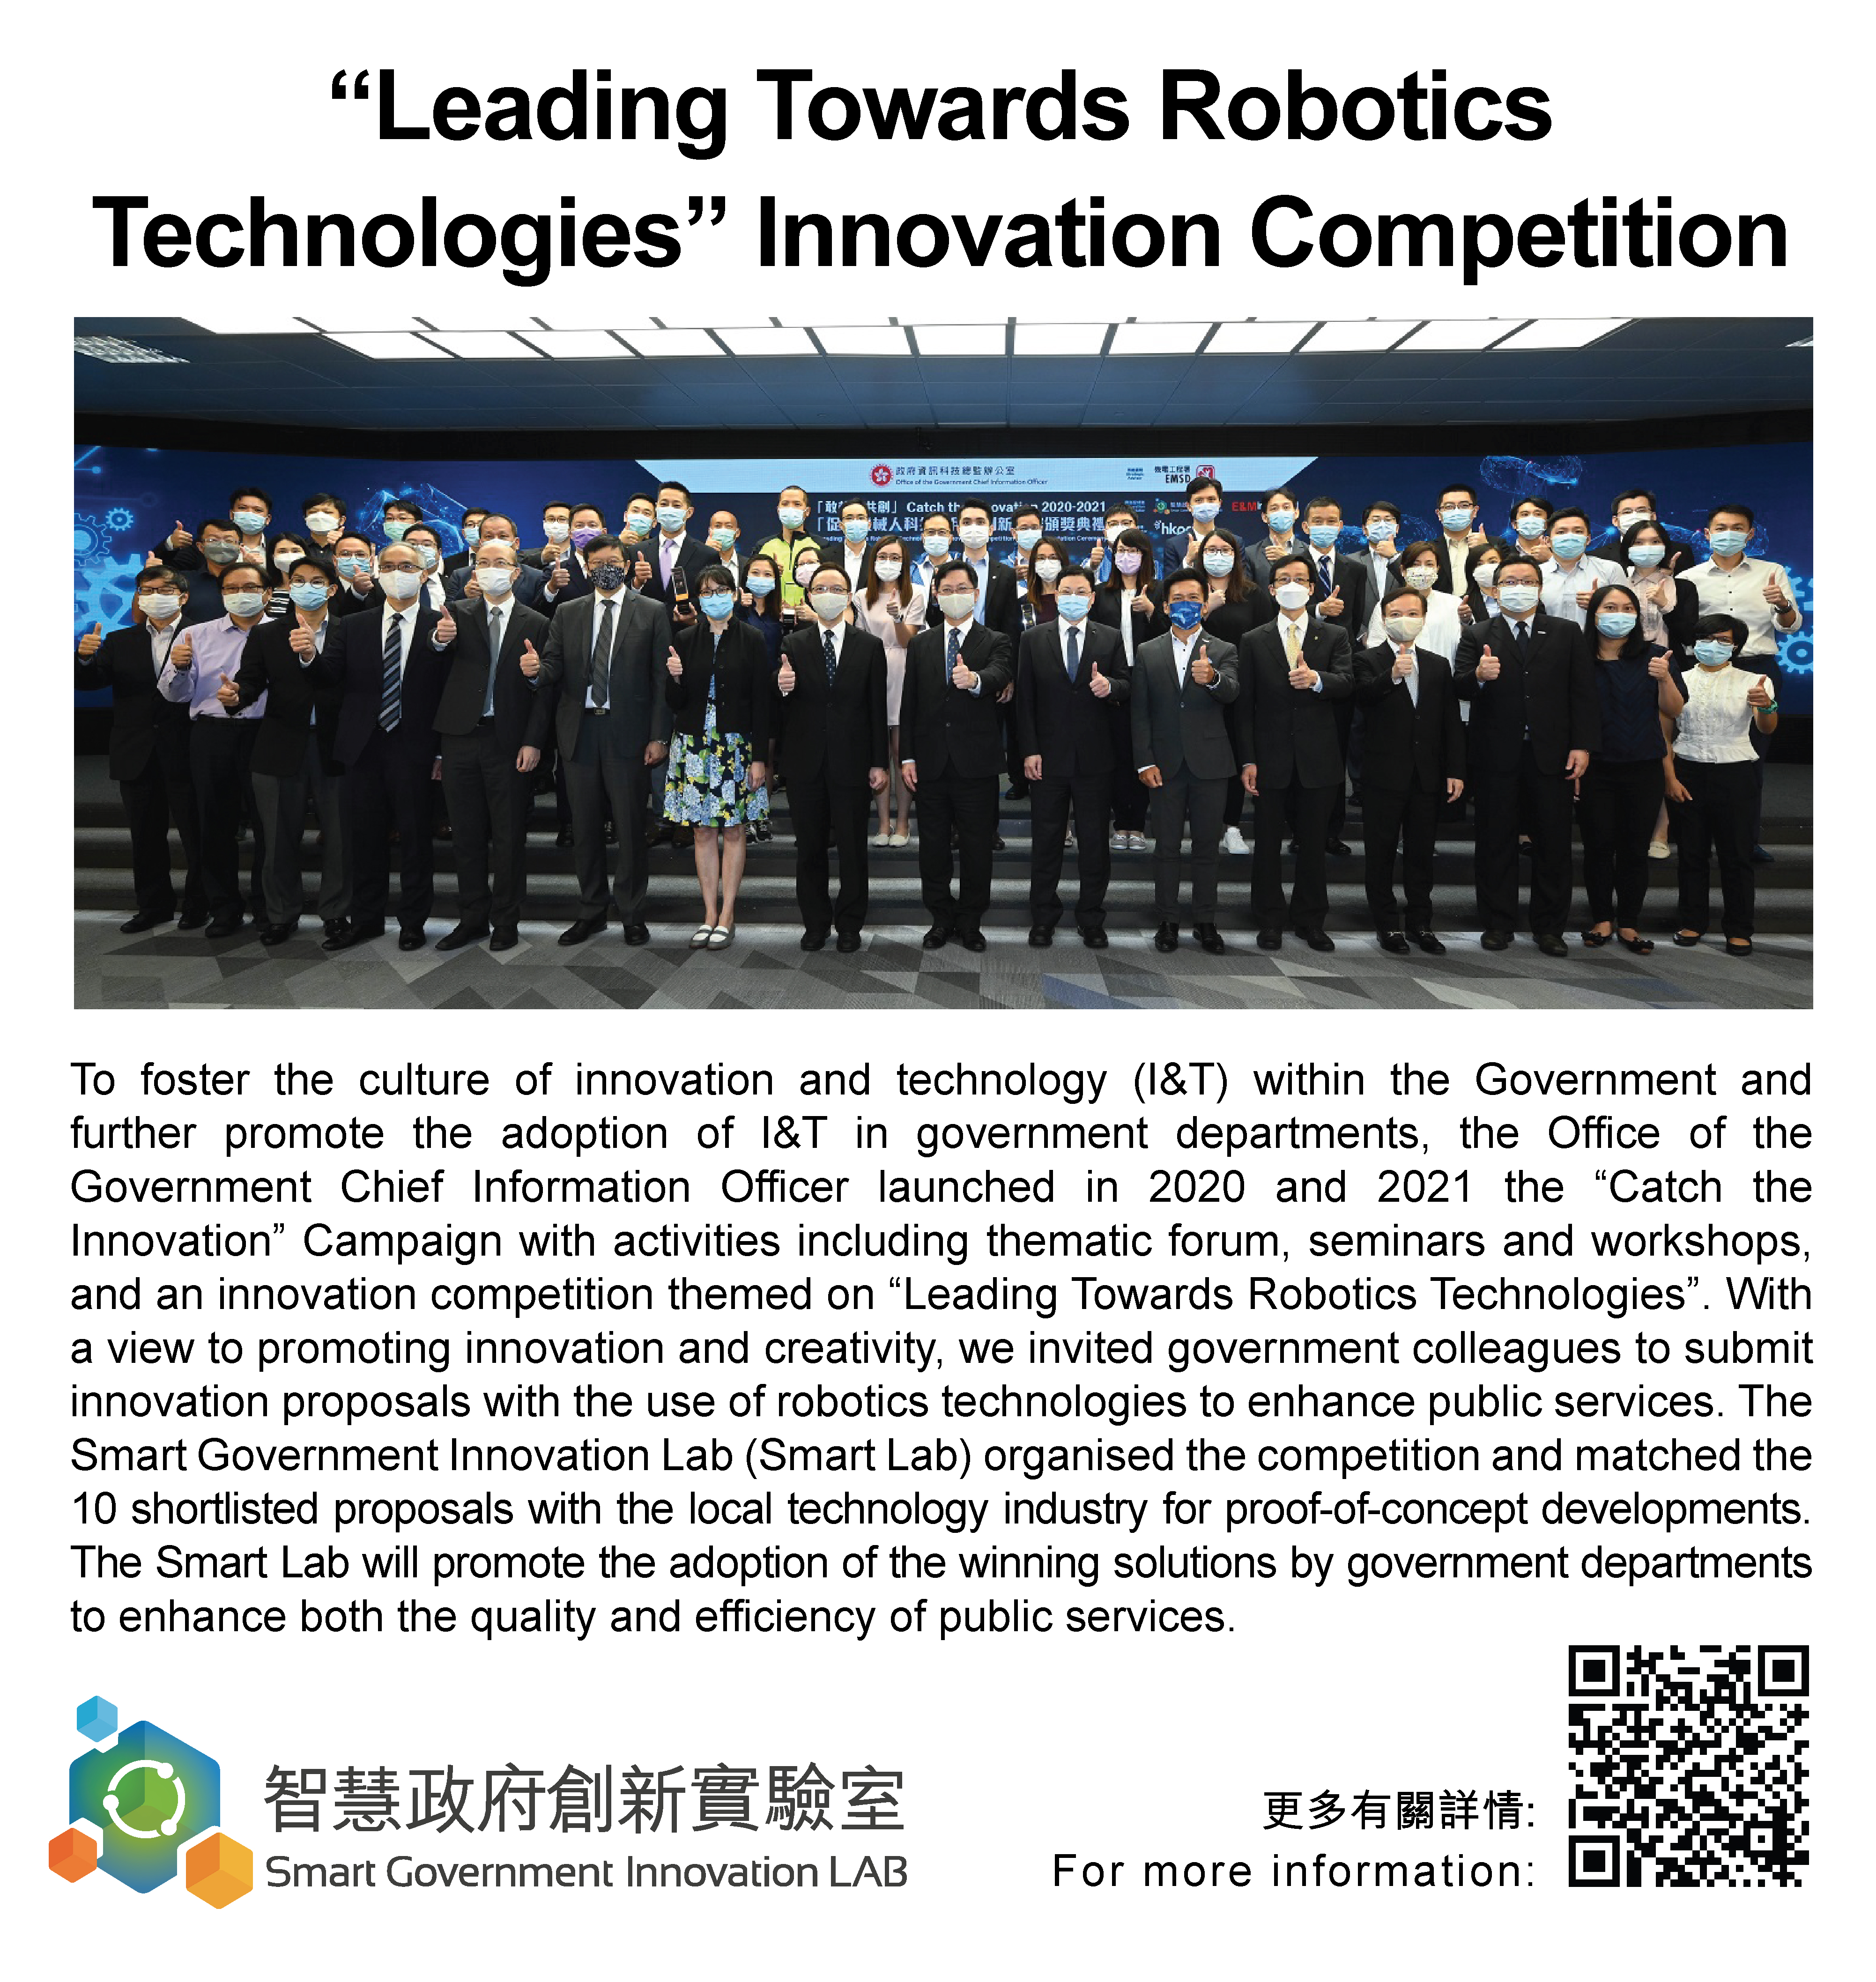 “Leading Towards Robotics Technologies” Innovation Competition,
					To foster the culture of innovation and technology (I&T) within the Government and further promote the adoption of I&T in government departments, the Office of the Government Chief Information Officer launched in 2020 and 2021 the “Catch the Innovation” Campaign with activities including thematic forum, seminars and workshops, and an innovation competition themed on “Leading Towards Robotics Technologies”. With a view to promoting innovation and creativity, we invited government colleagues to submit innovation proposals with the use of robotics technologies to enhance public services. The Smart Government Innovation Lab (Smart Lab) organised the competition and matched the 10 shortlisted proposals with the local technology industry for proof-of-concept developments. The Smart Lab will promote the adoption of the winning solutions by government departments to enhance both the quality and efficiency of public services.